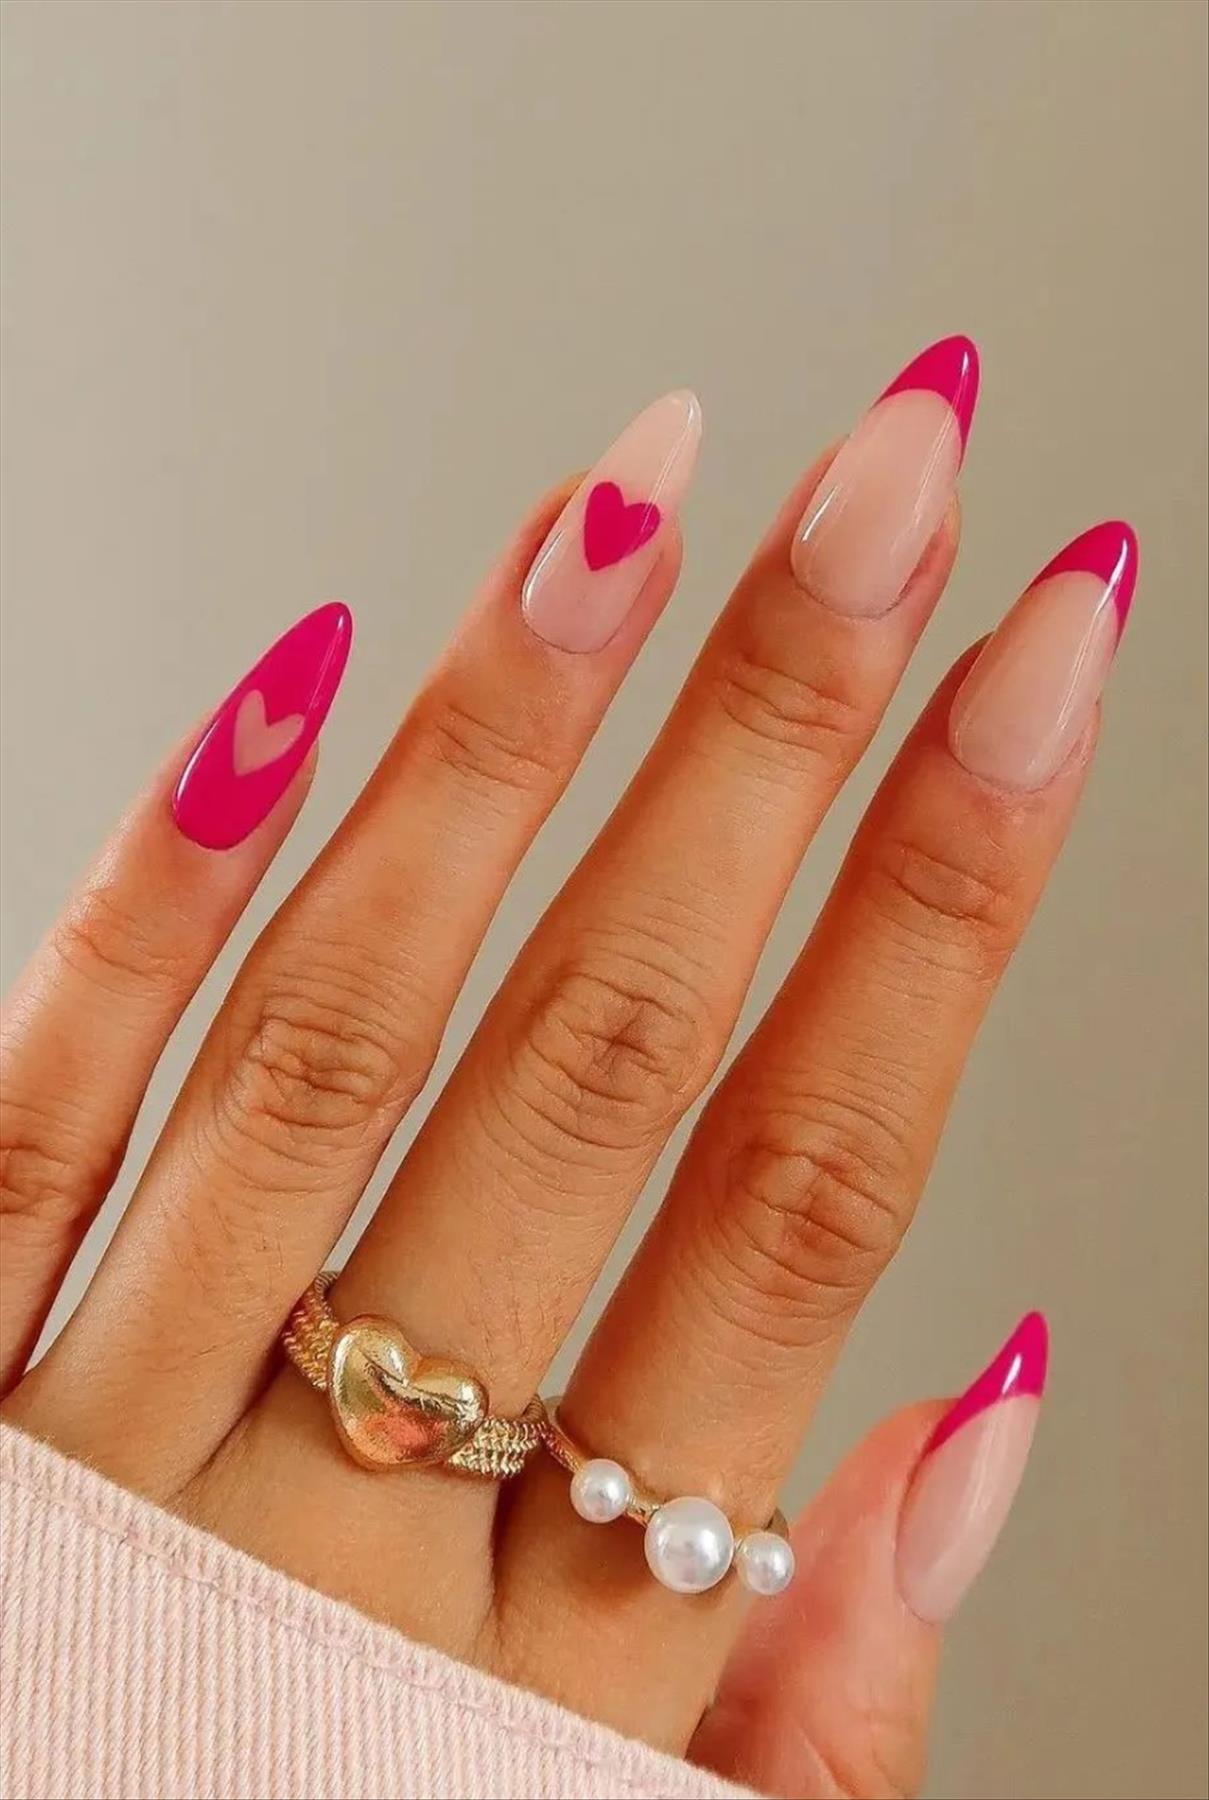 Romantic heart nails art for Valentines day mani